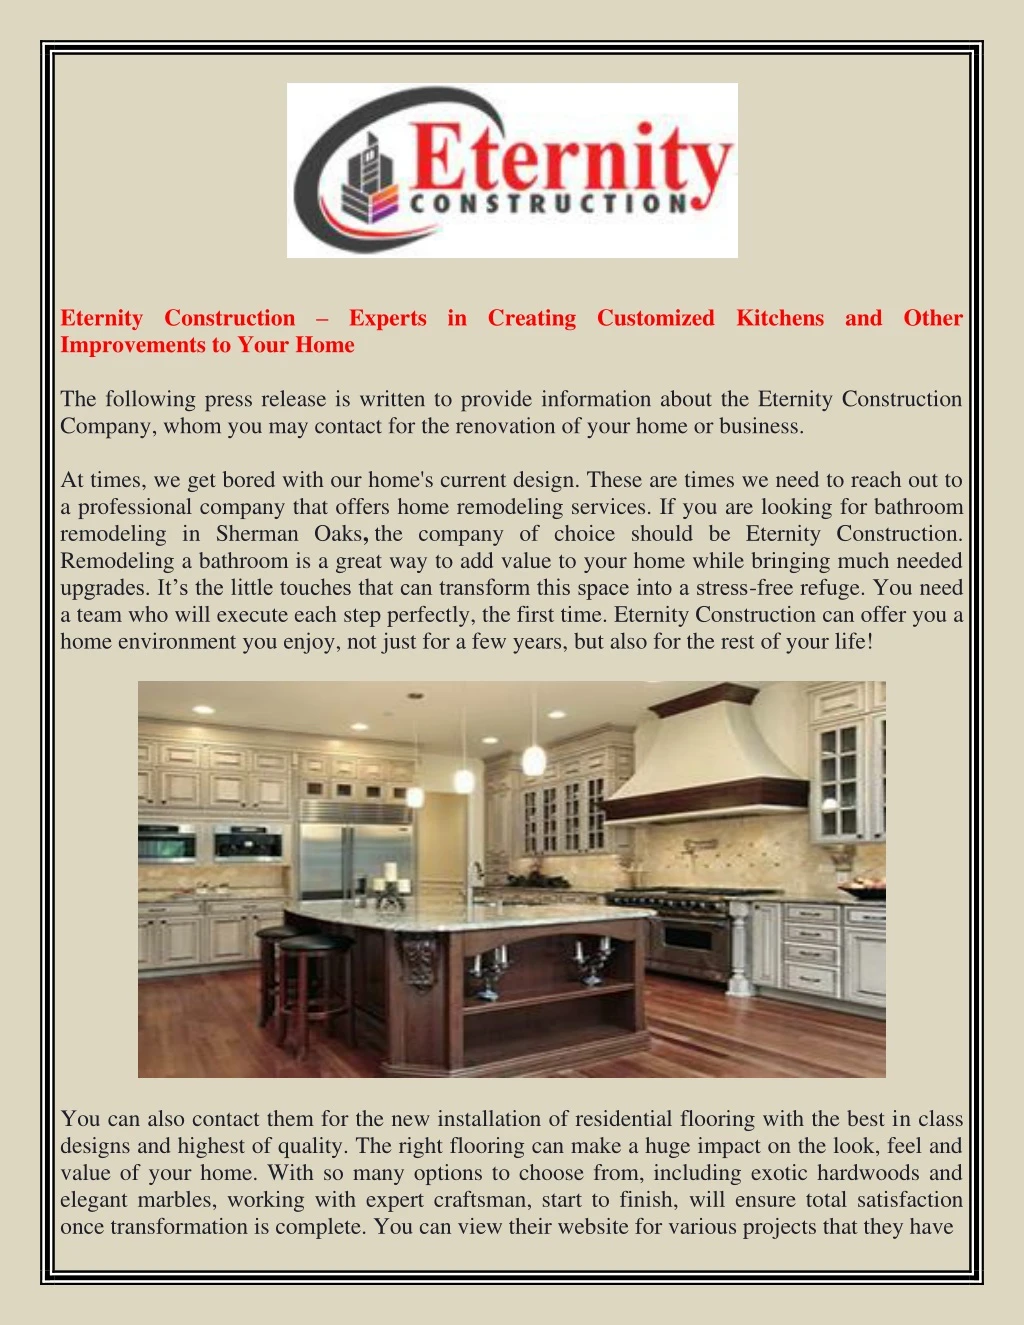 eternity construction experts in creating